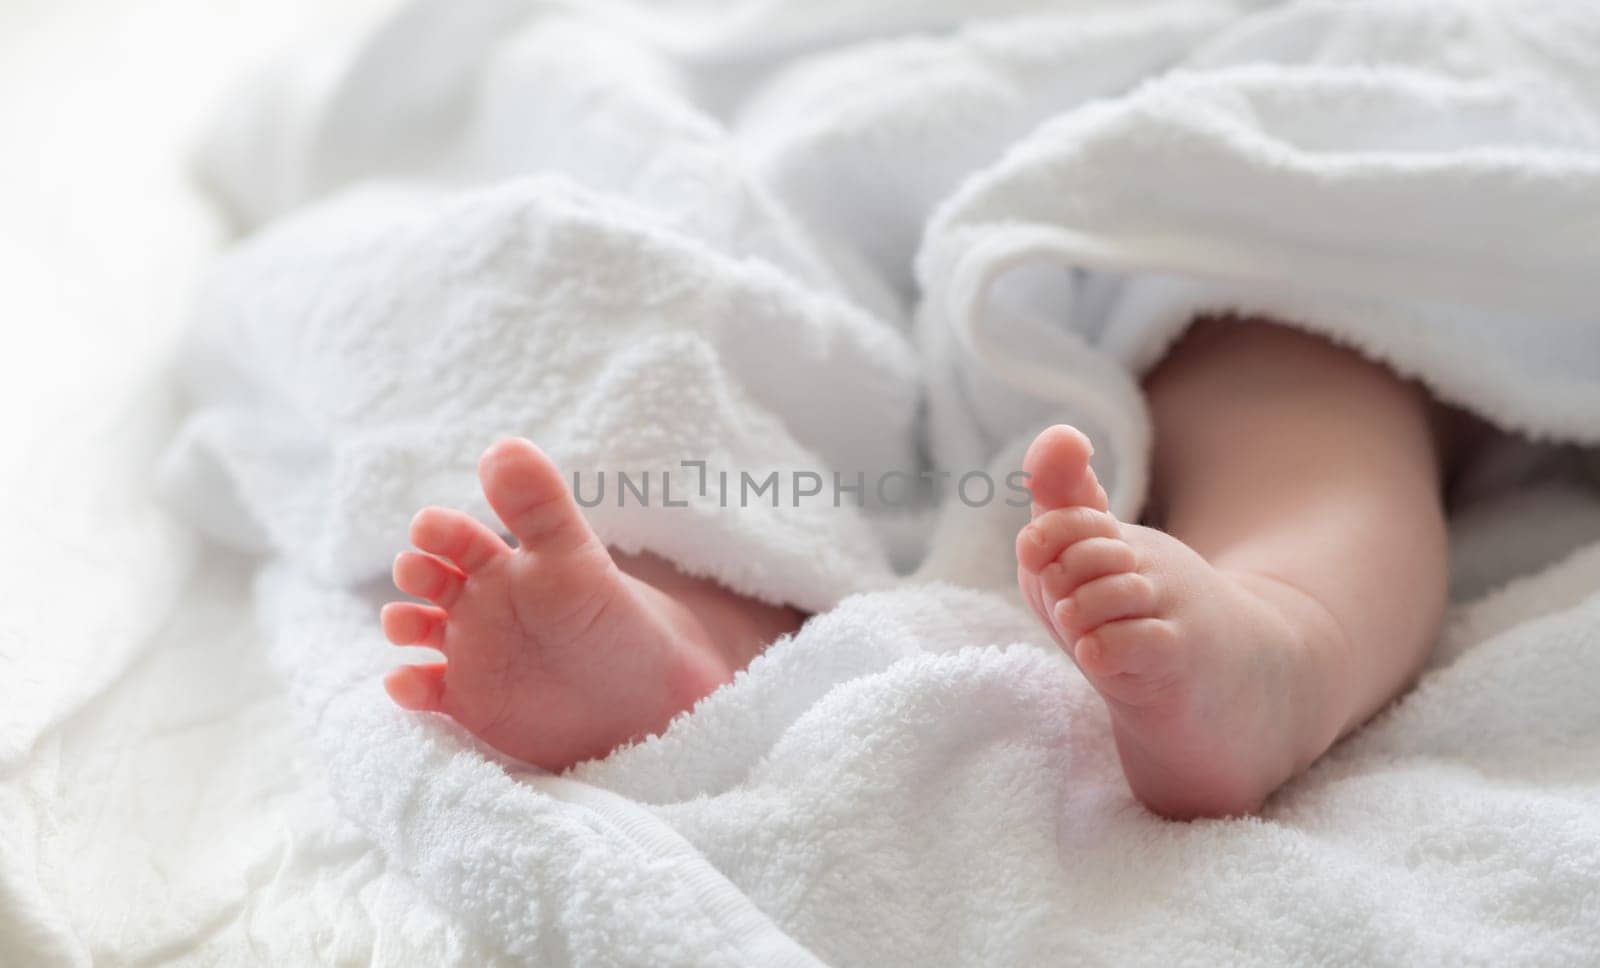 Delicate feet of a newborn under a towel's embrace. Concept of innocence and warmth by Mariakray